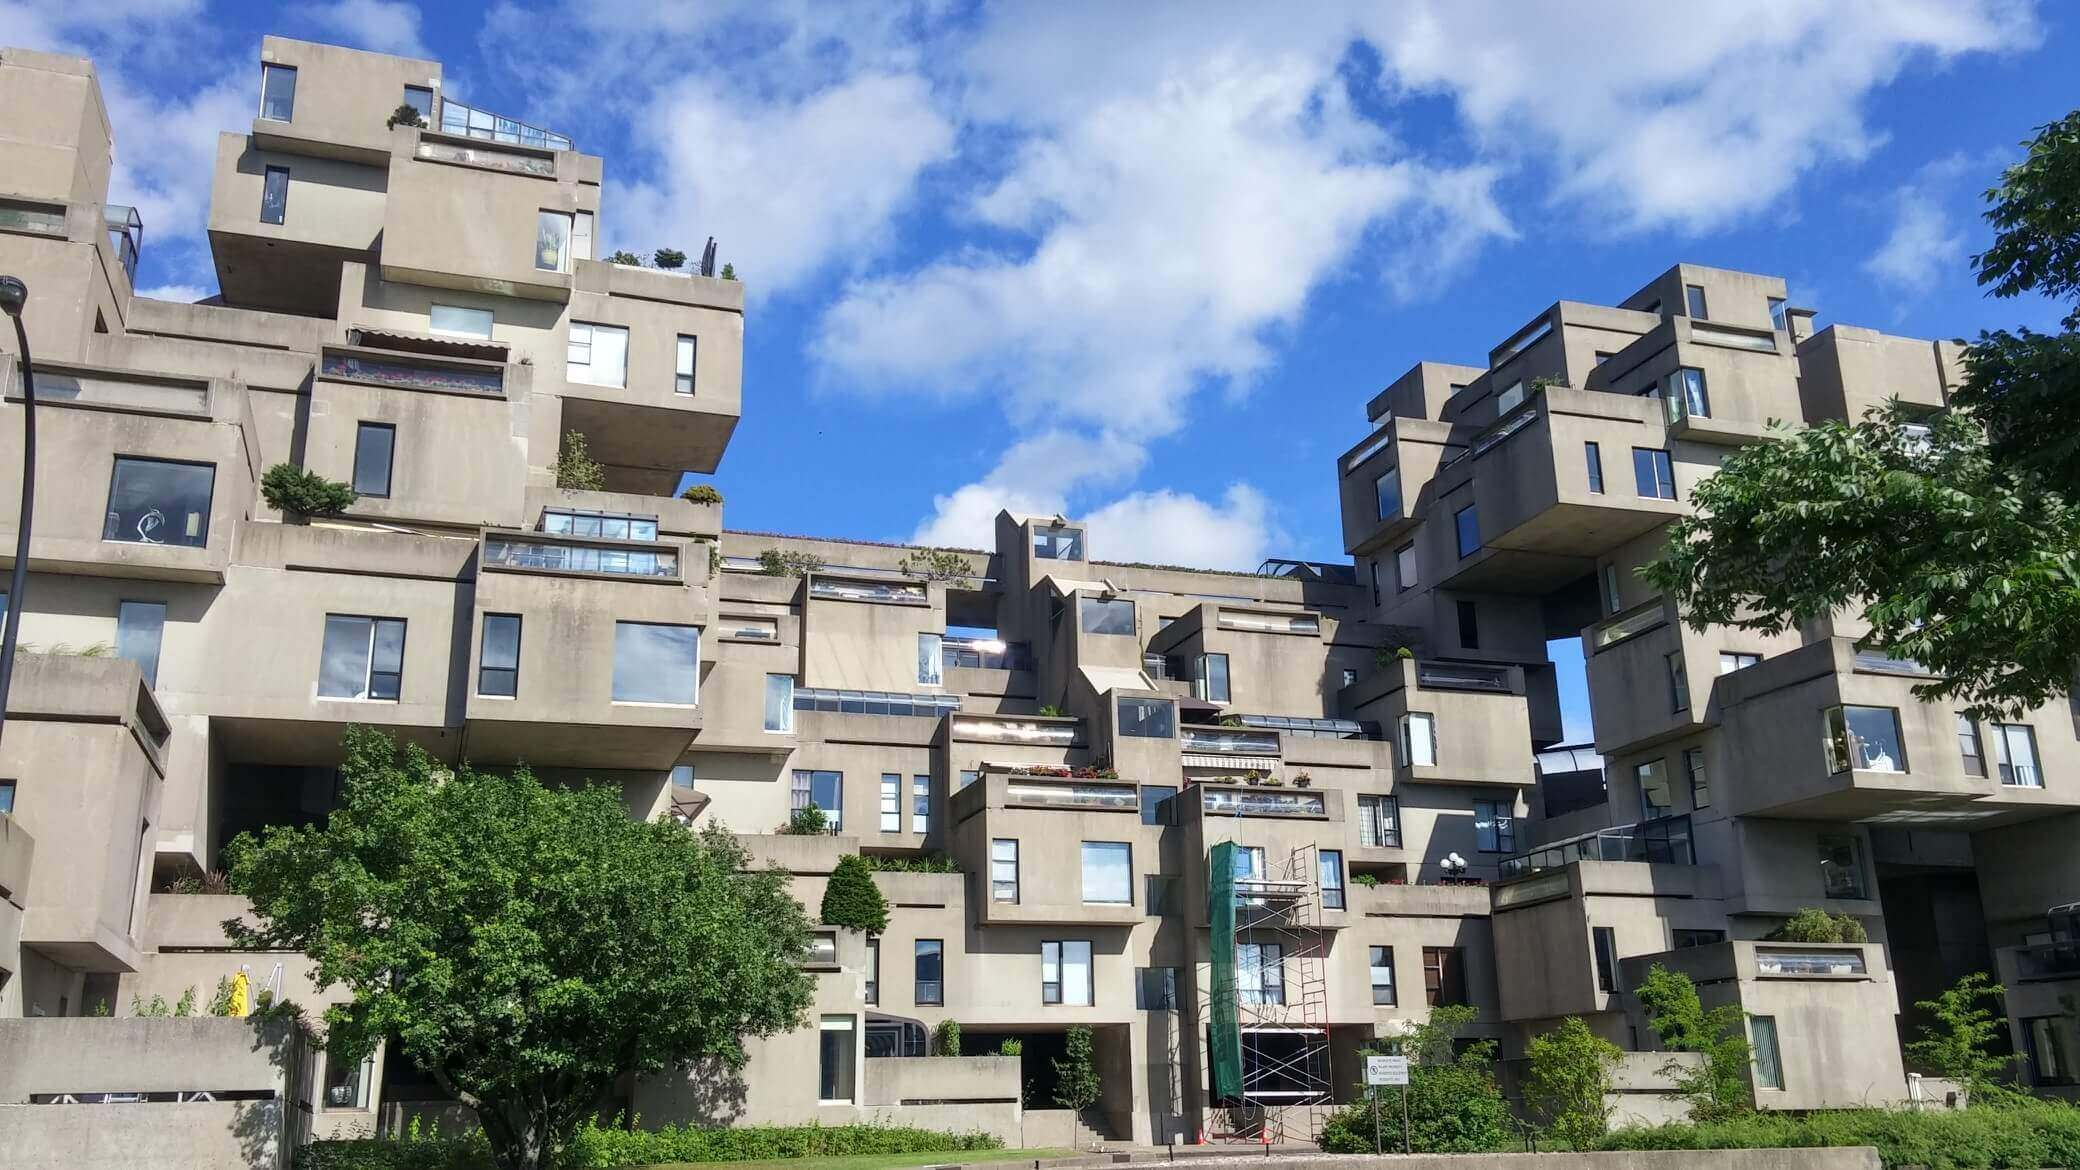 Habitat 67, also built for Expo 67, was originally conceived as graduate dissertation. The concept was to build affordable, modular housing that could take on all sorts of novel configurations using the same basic building block, a concrete cube. Unfortunately, the experiment didn't end up working out since people found the units highly desirable and were willing to pay more to live there, plus each concrete cube ended up costing $140,000 to fabricate